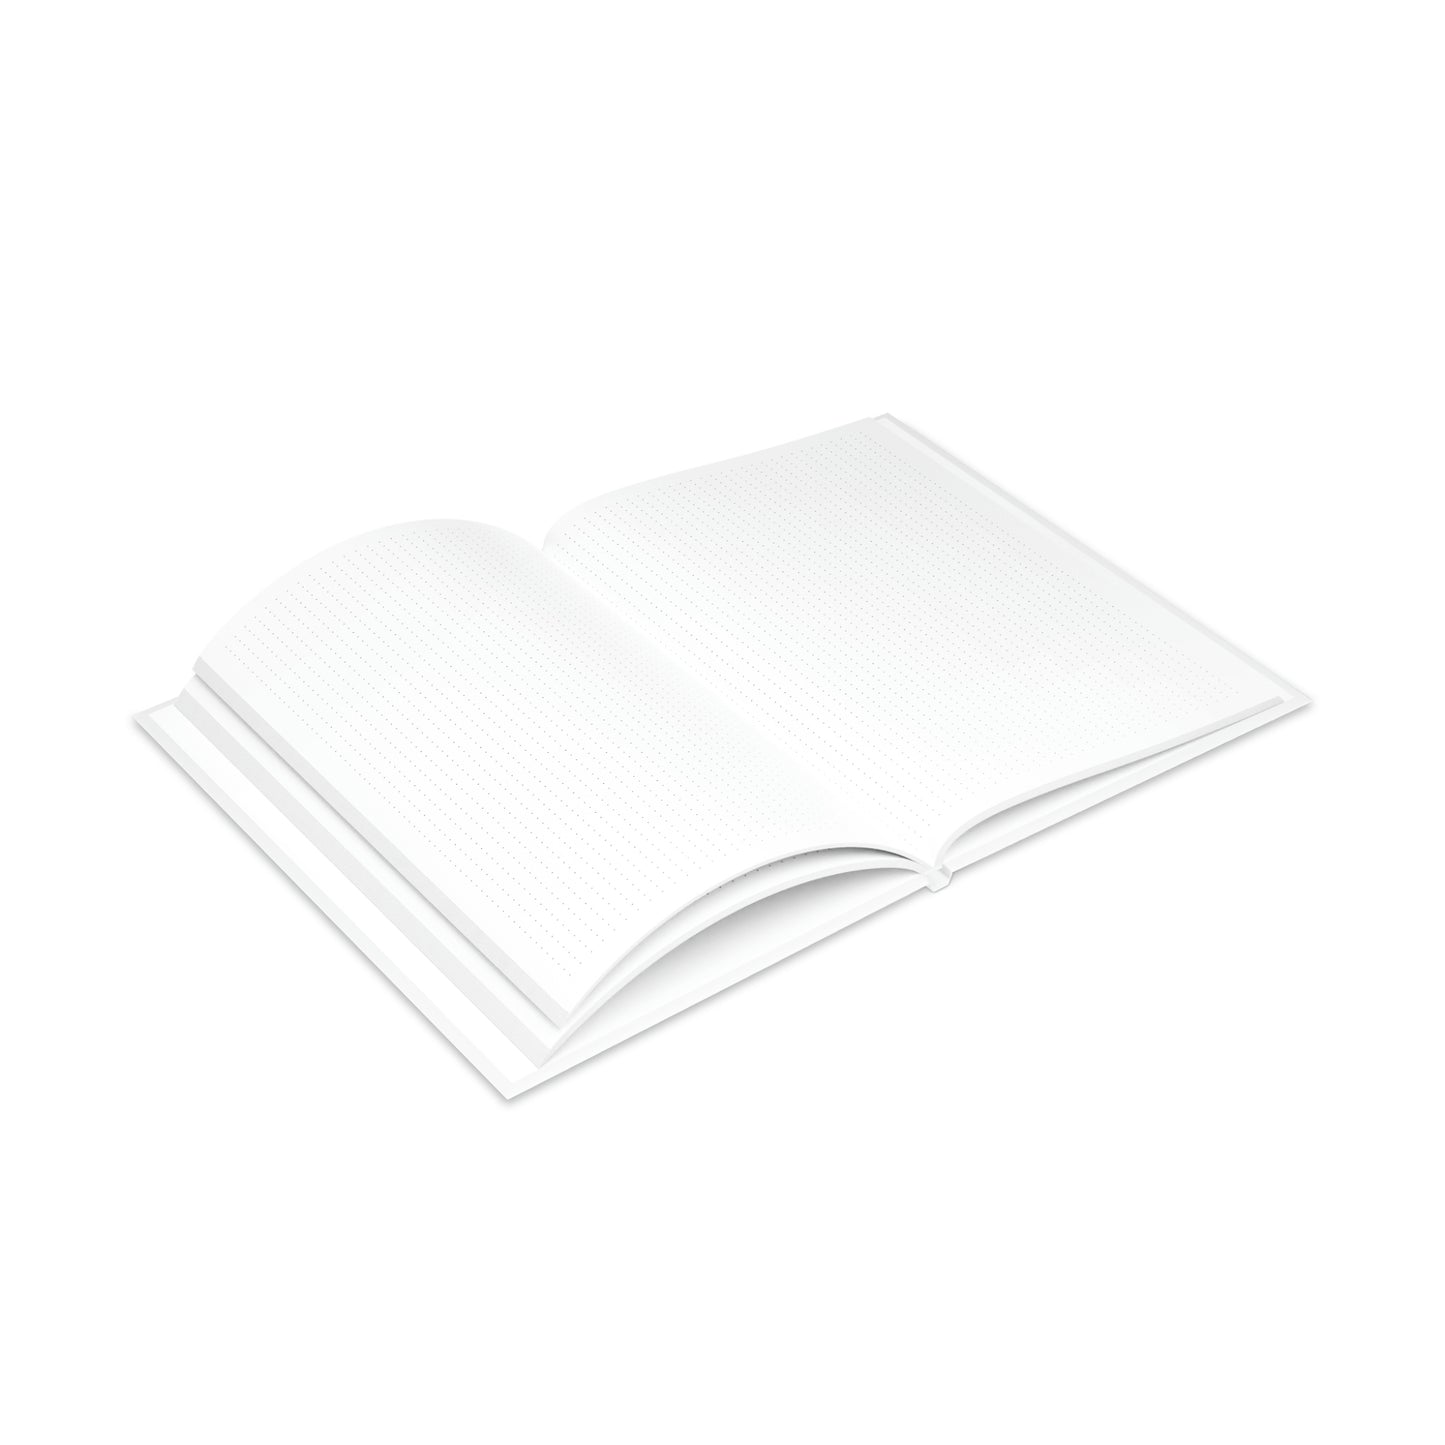 Learning - Hardcover Notebook with Puffy Covers